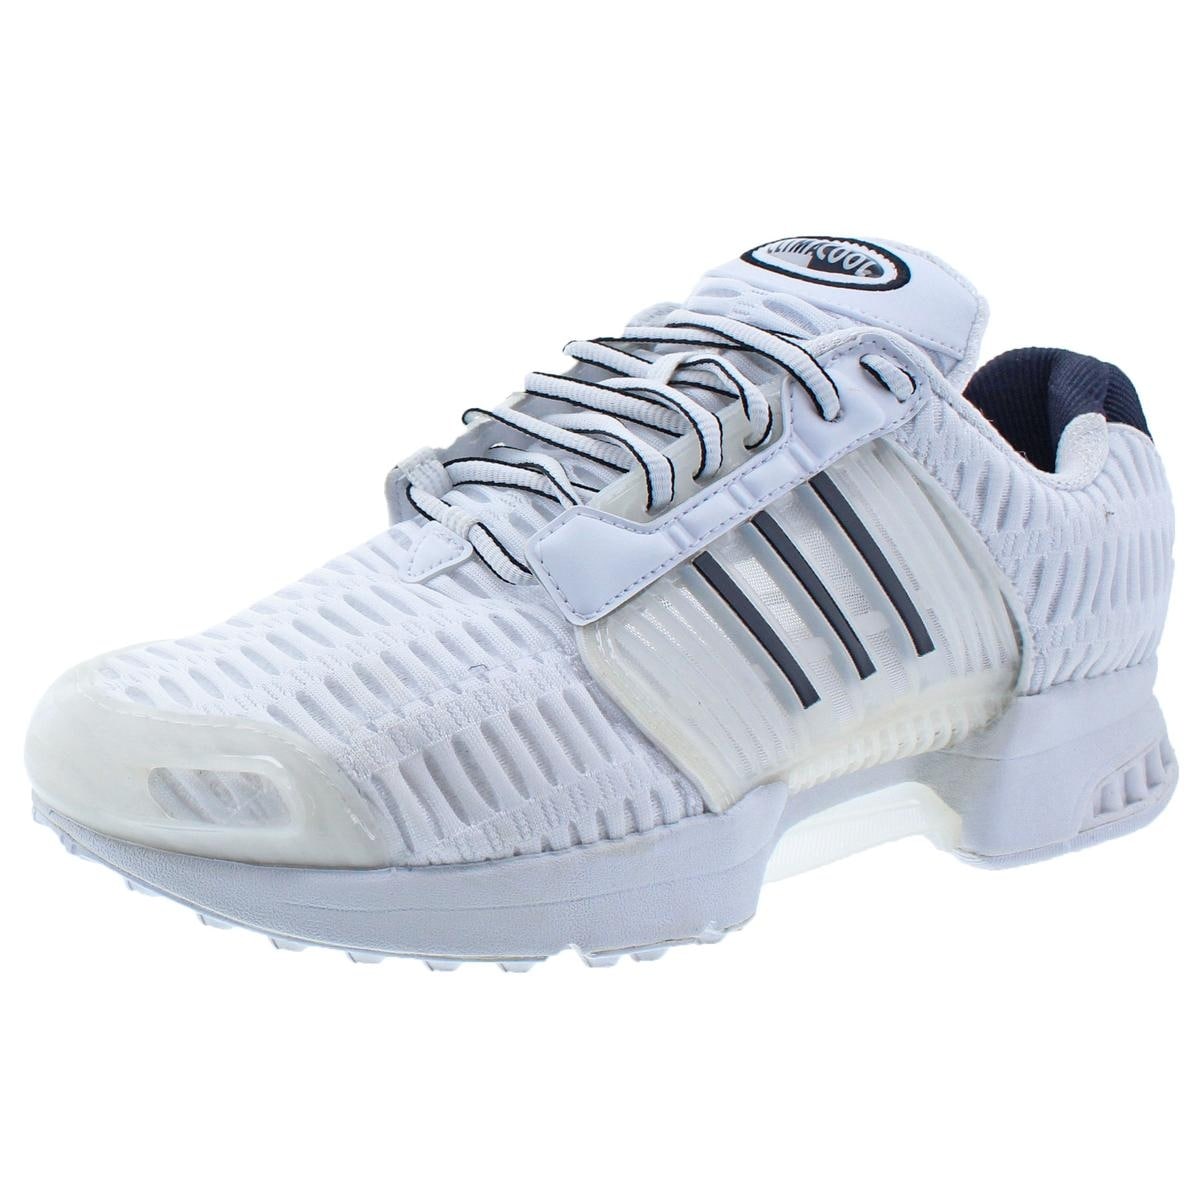 adidas climacool chill training shoes mens